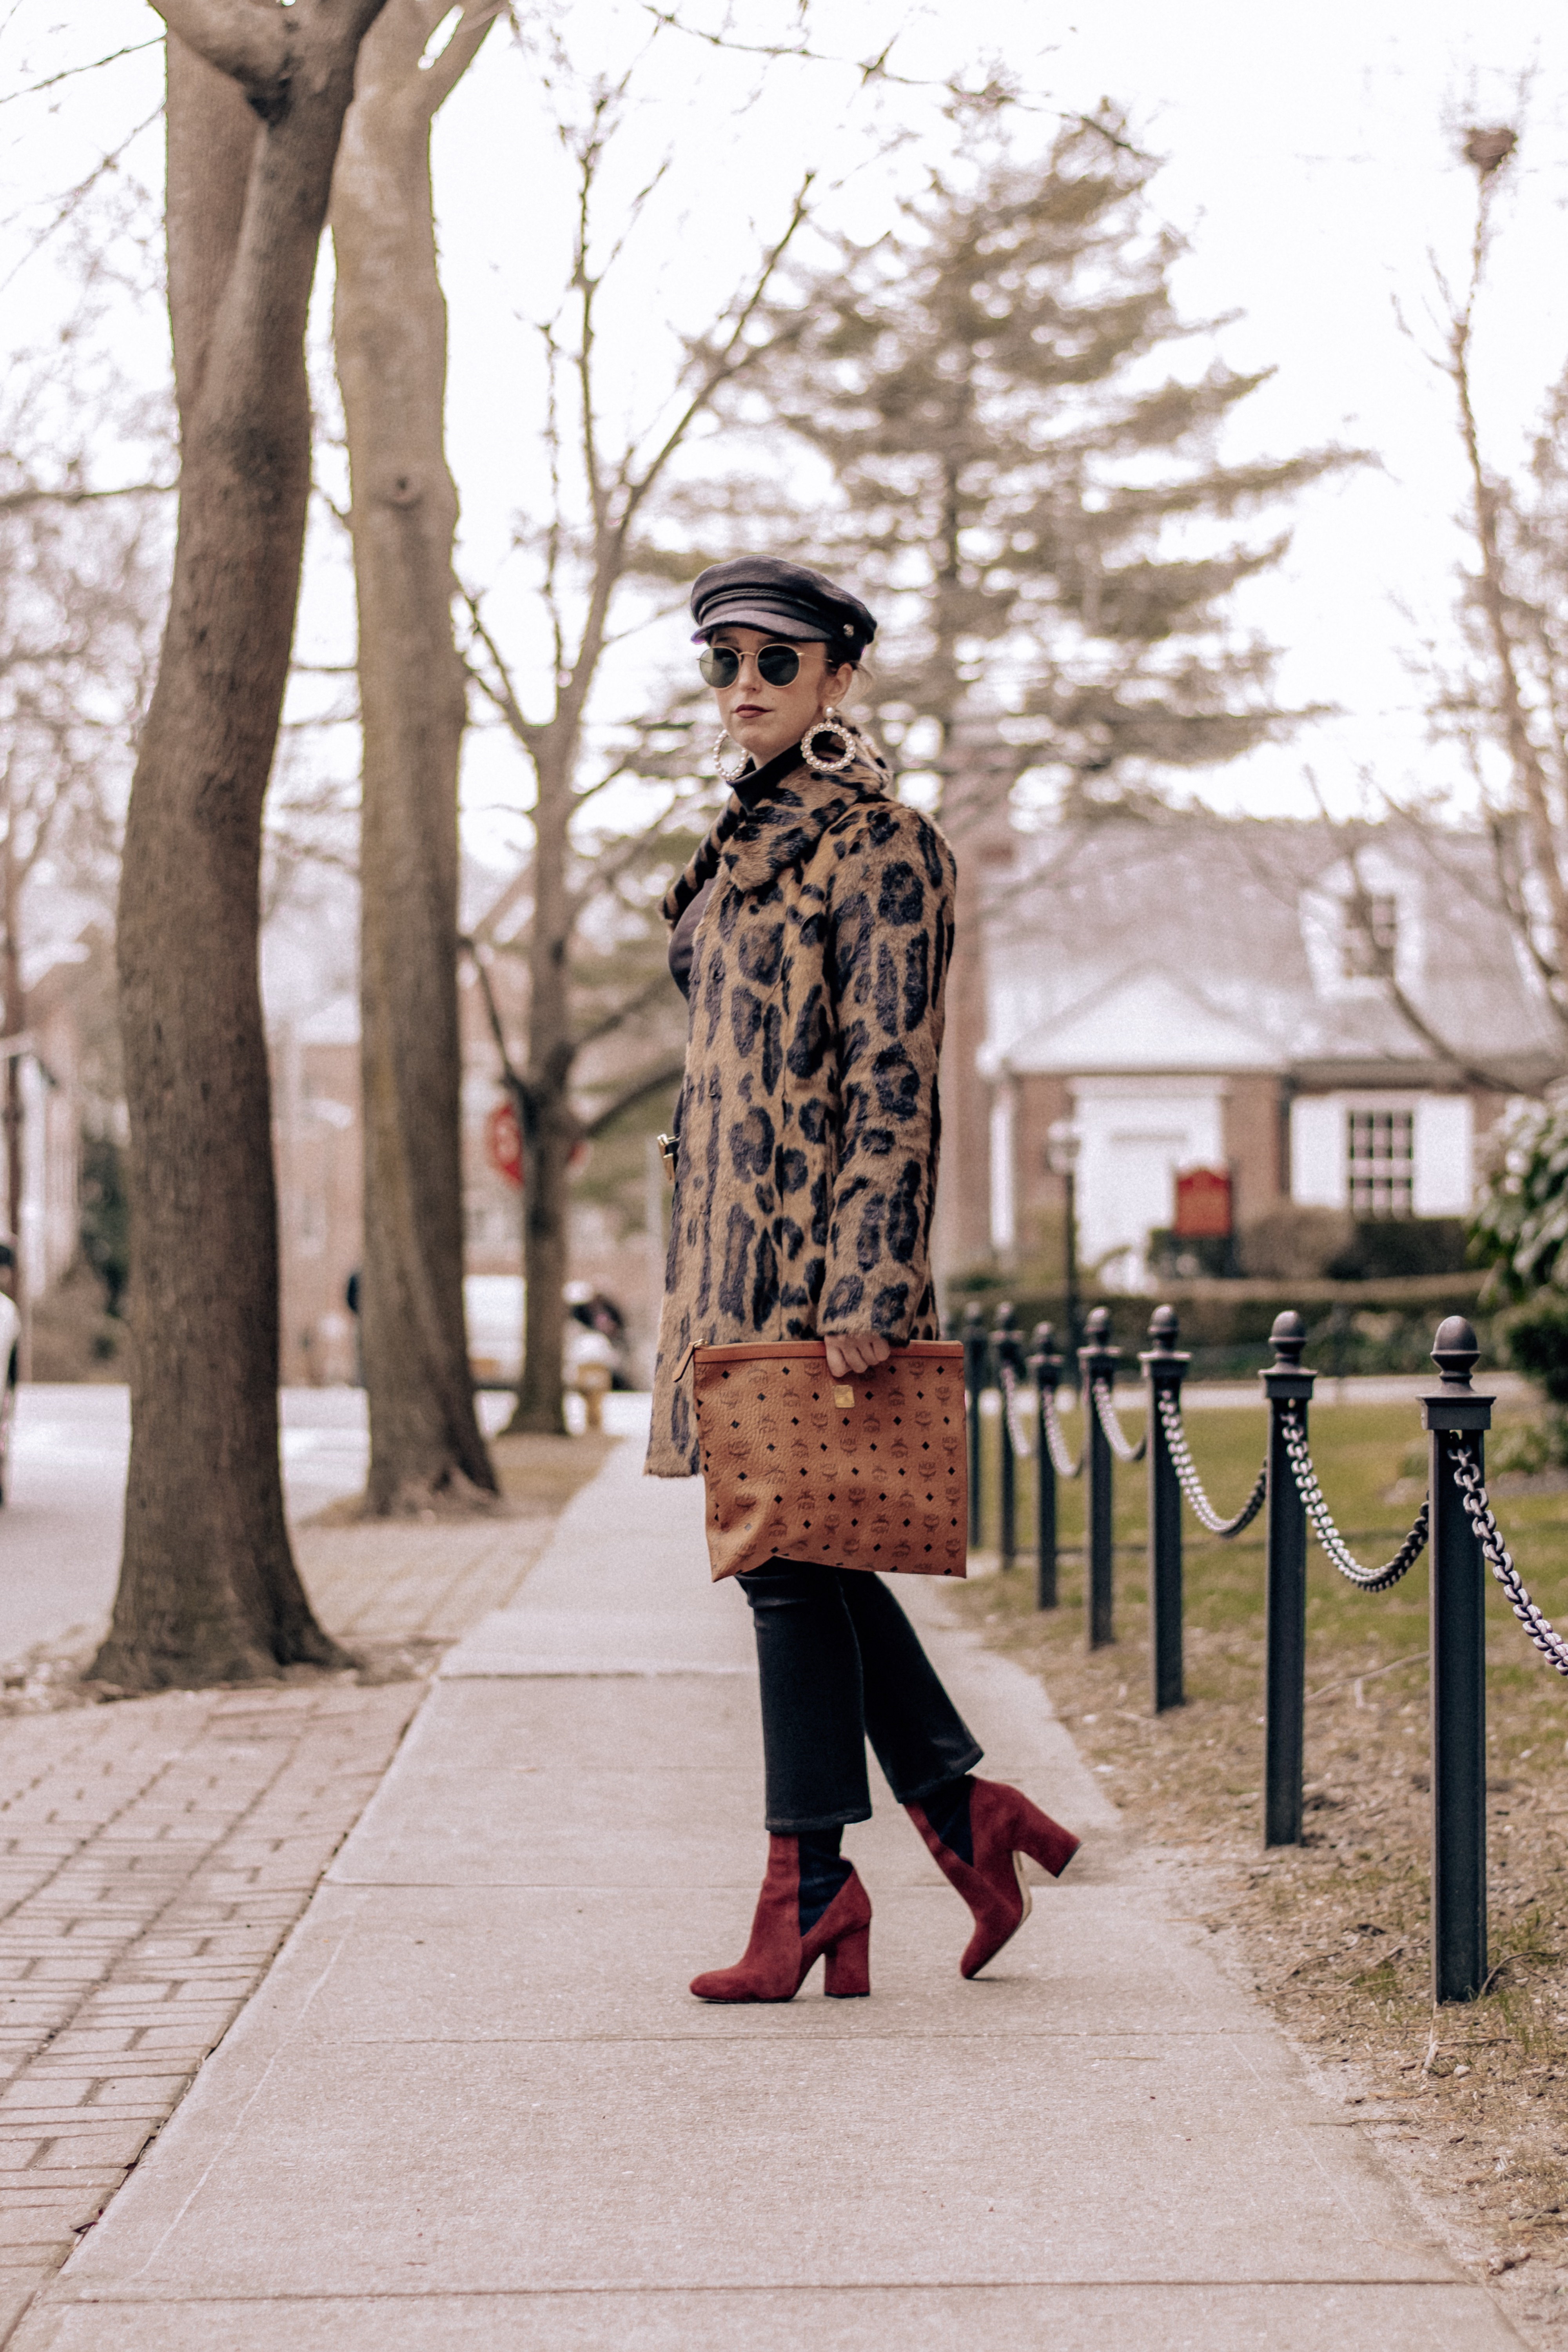 How to Take Your Blog Posts to the Next Level-Simply by Simone-Outfit-Fashion-Style-Blogging Tips-Blog Advice #bloggingtips #outfit #fashion #leopardcoat #winterfashion #winterstyle